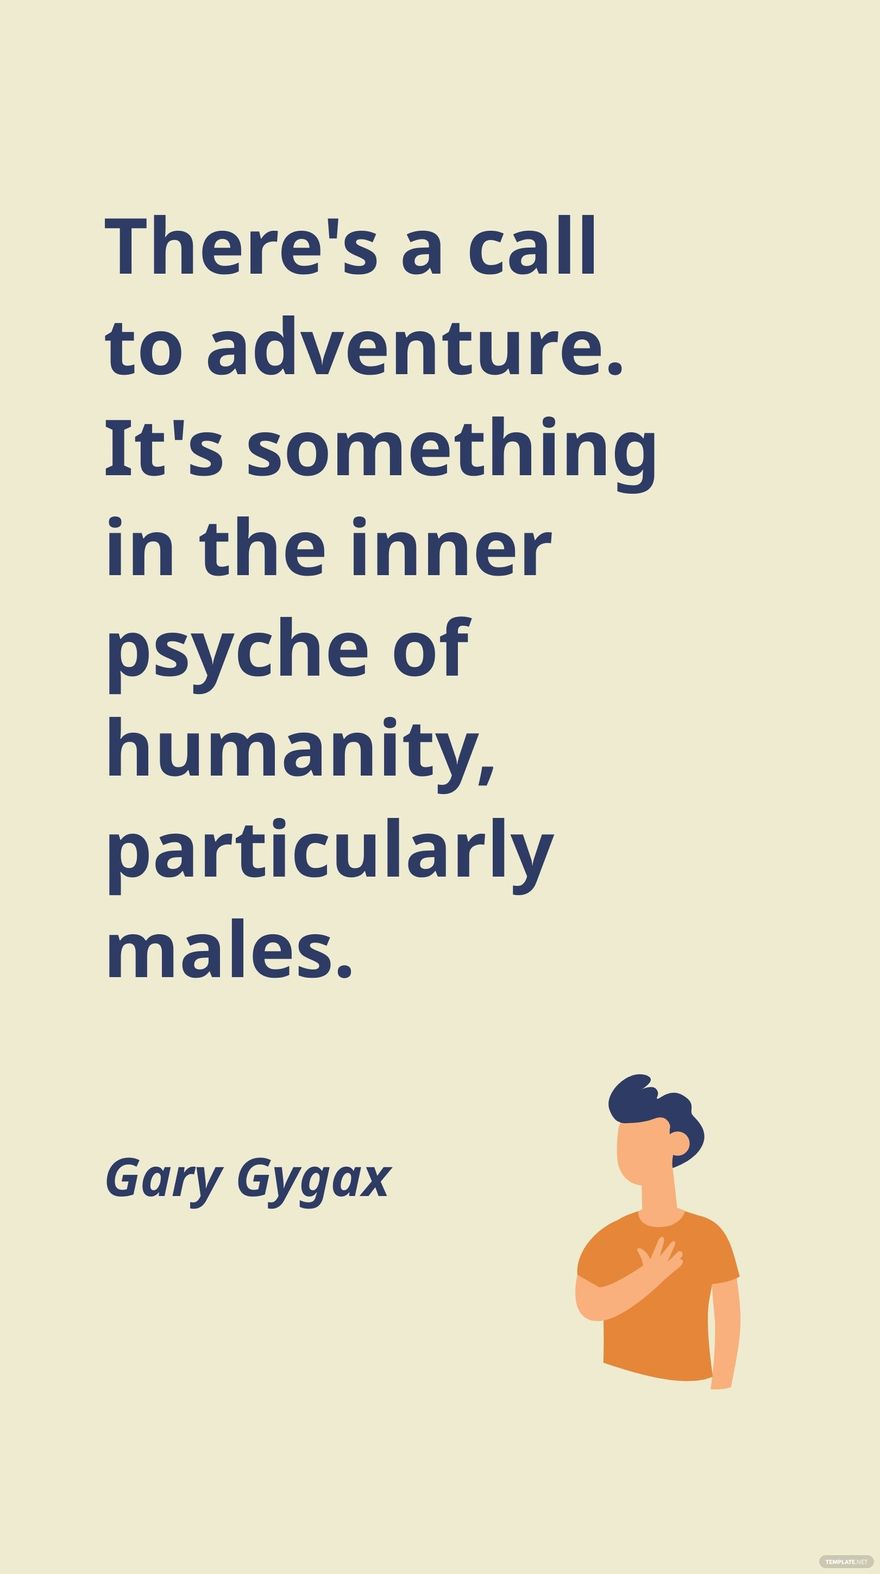 Gary Gygax - There's a call to adventure. It's something in the inner psyche of humanity, particularly males.